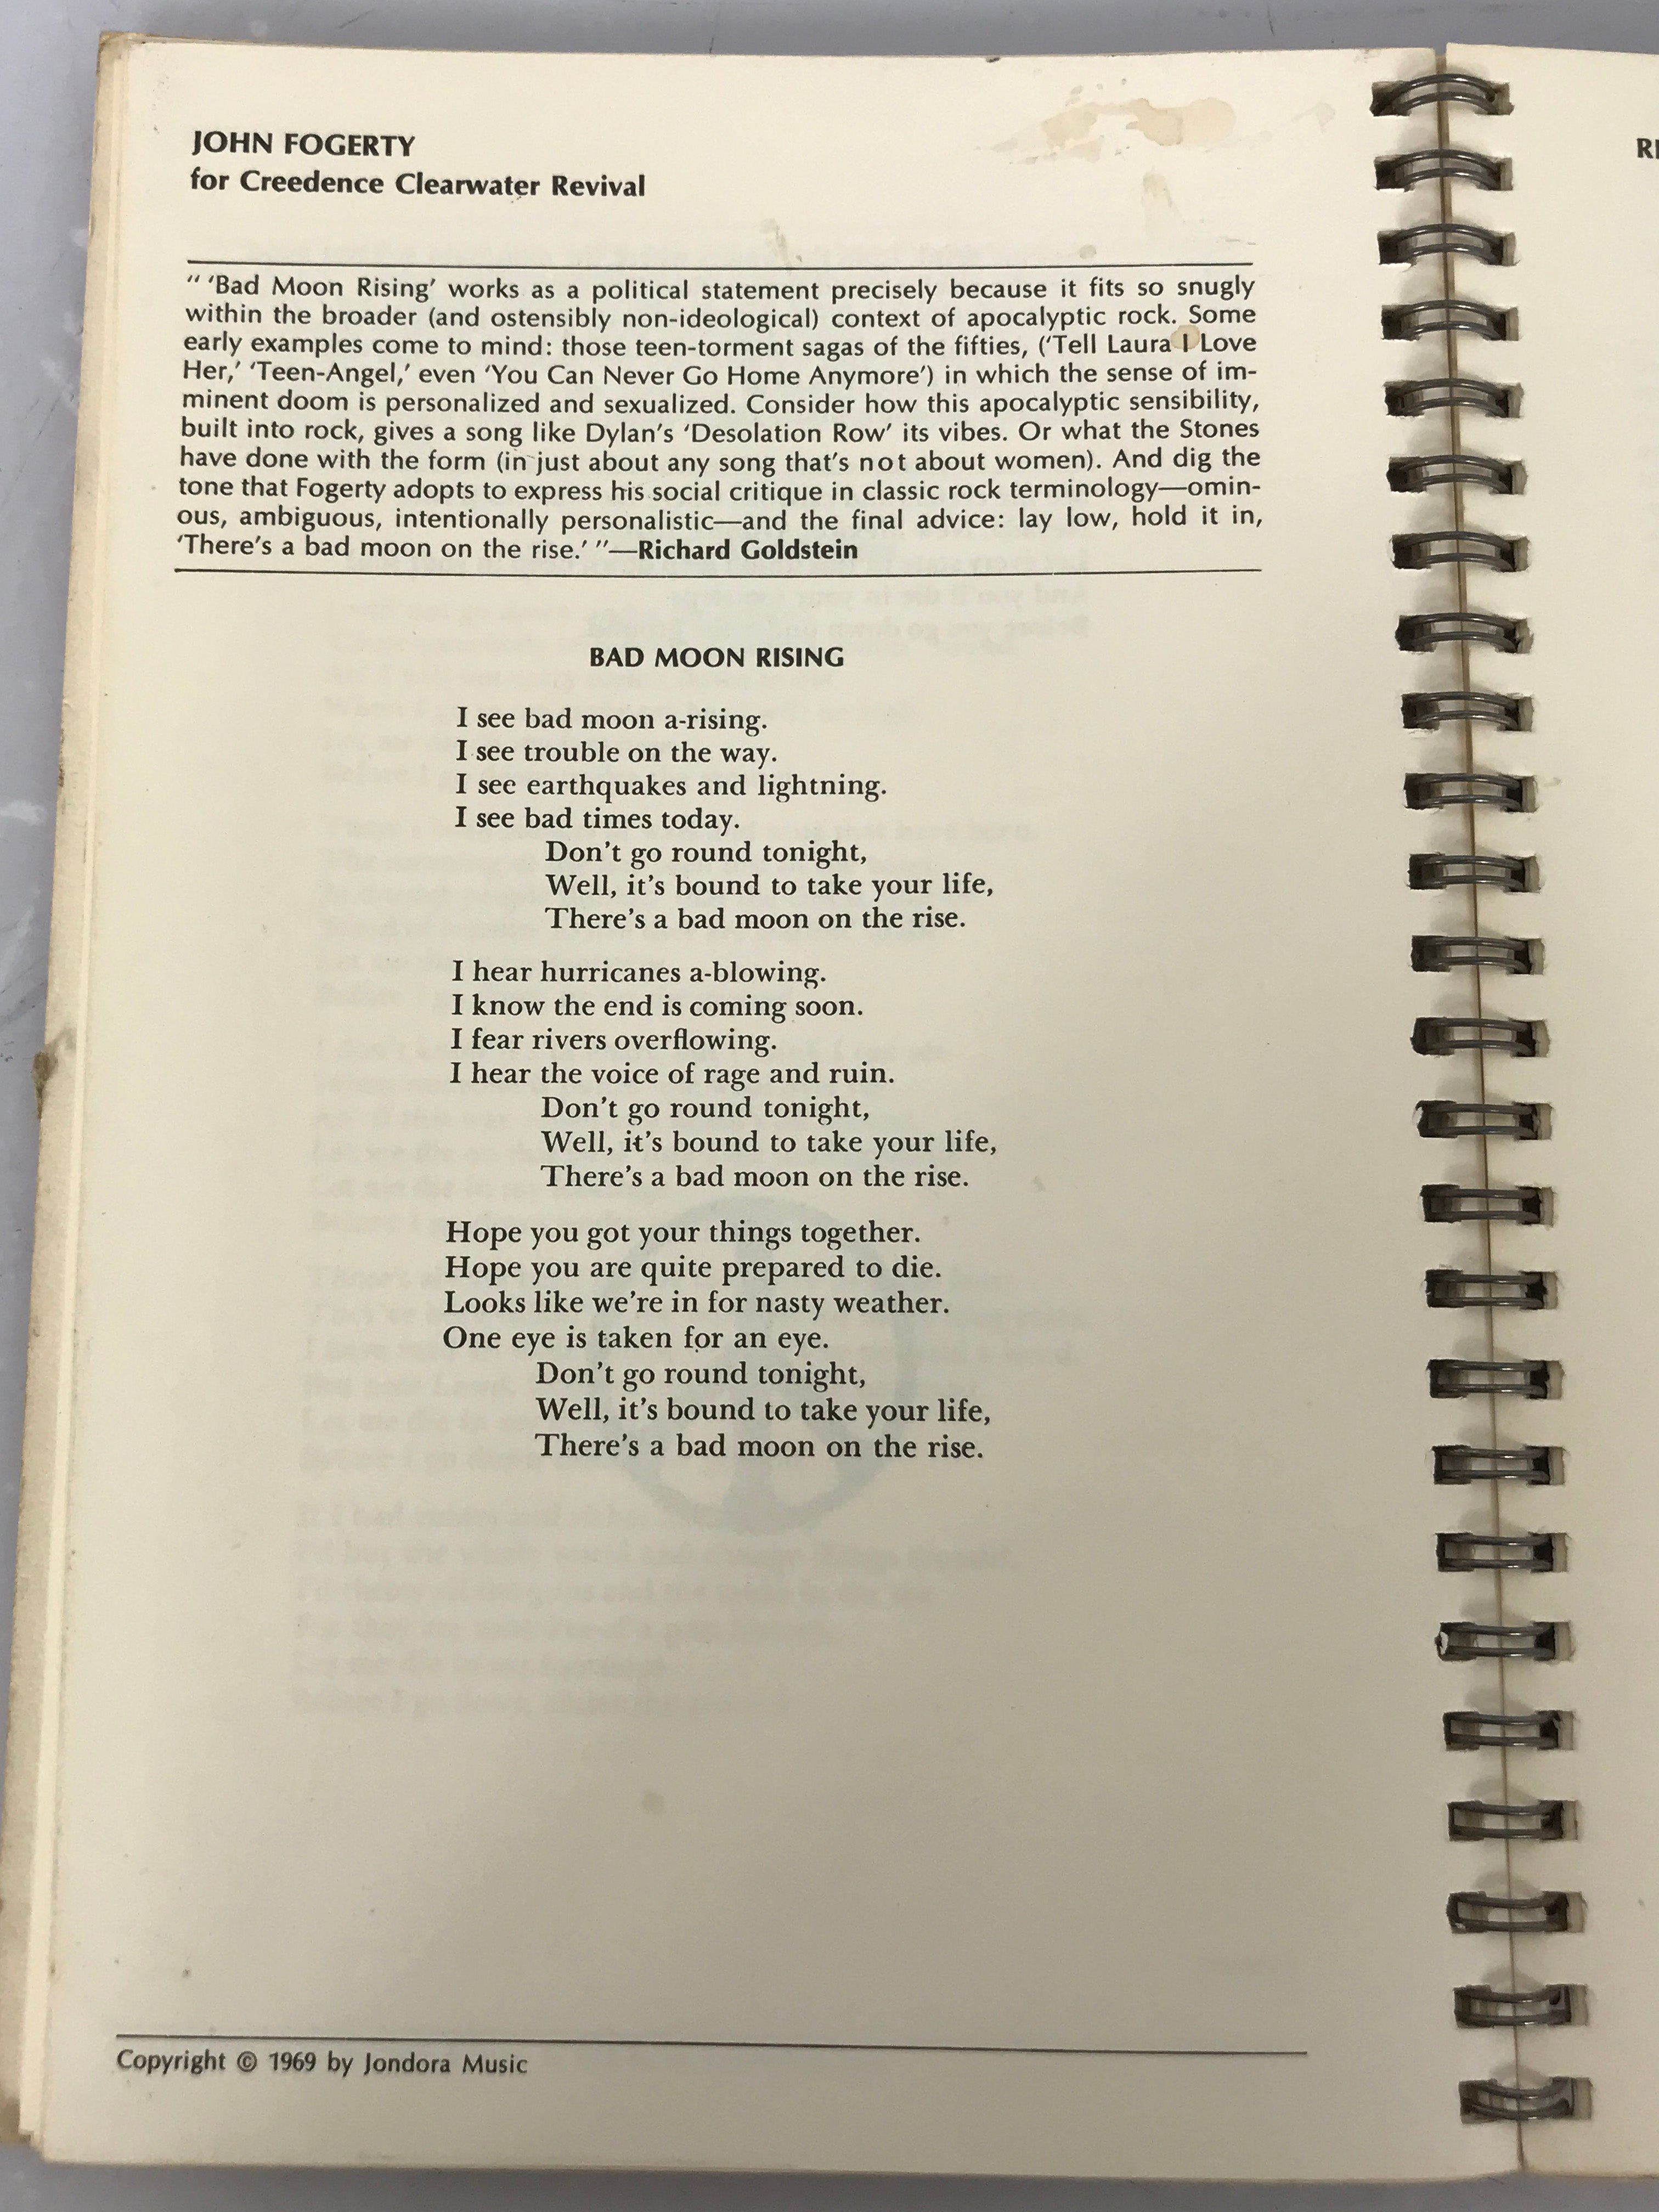 When the Mode of the Music Changes an Anthology of Rock 'n' Roll Lyrics with a Forward by Pete Seeger 1971 Spiral Bound